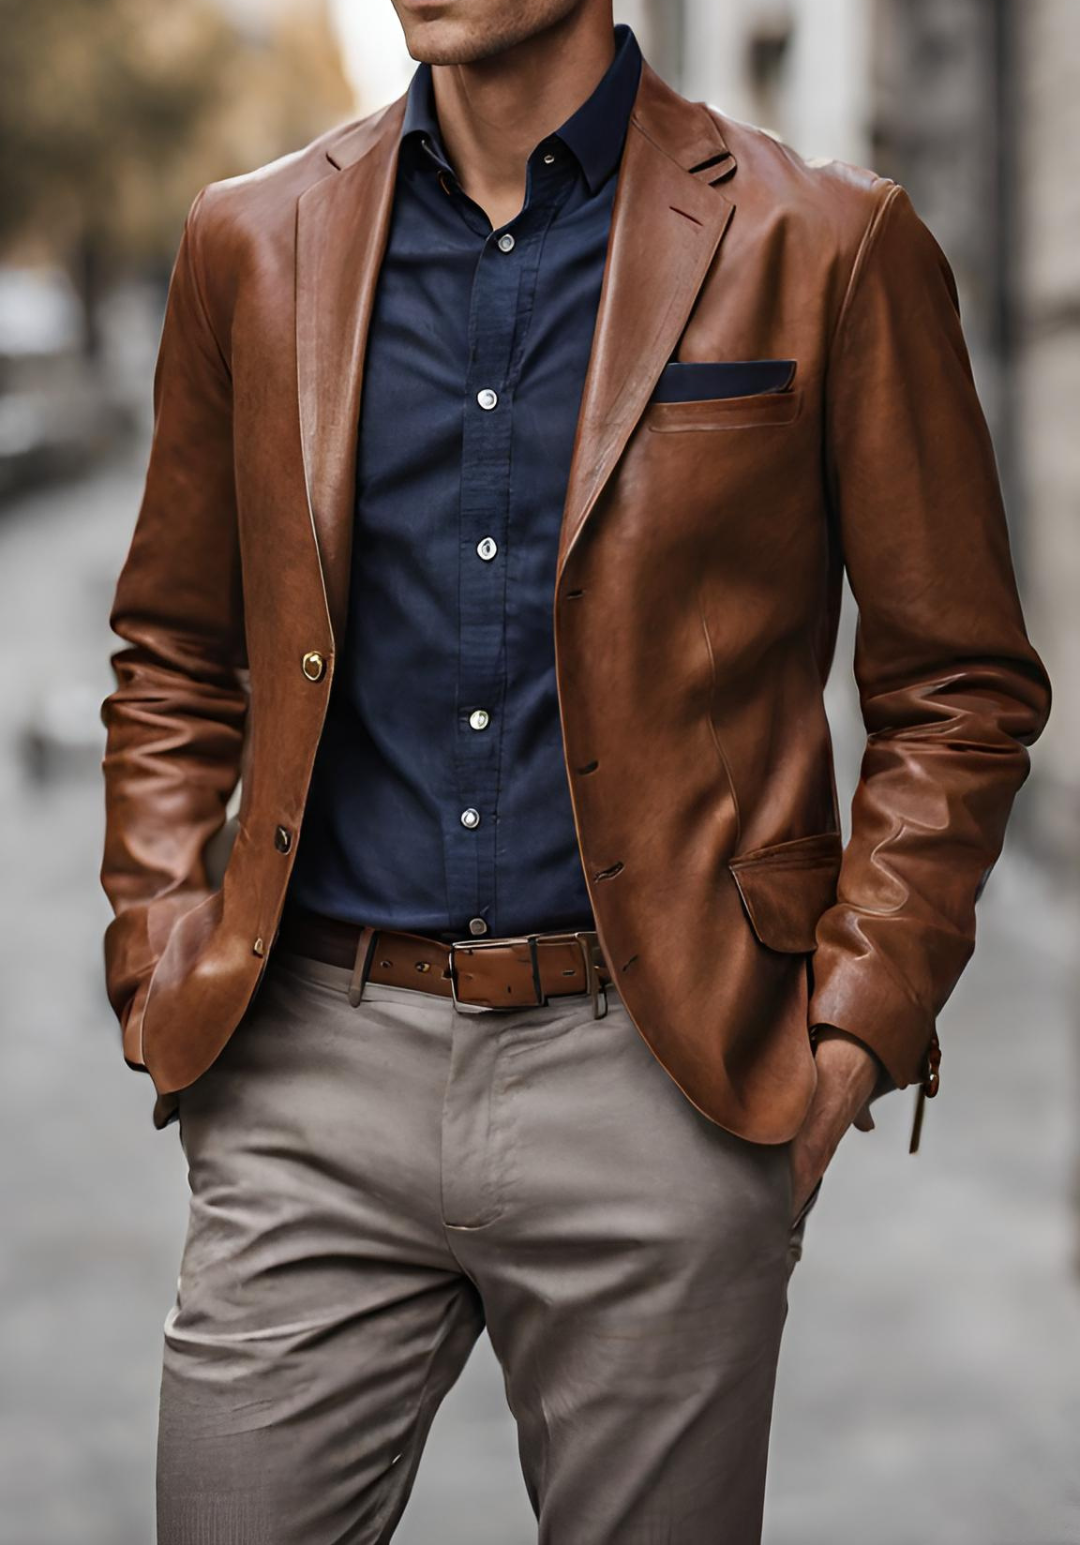 Brown Leather Blazer Outfit 1